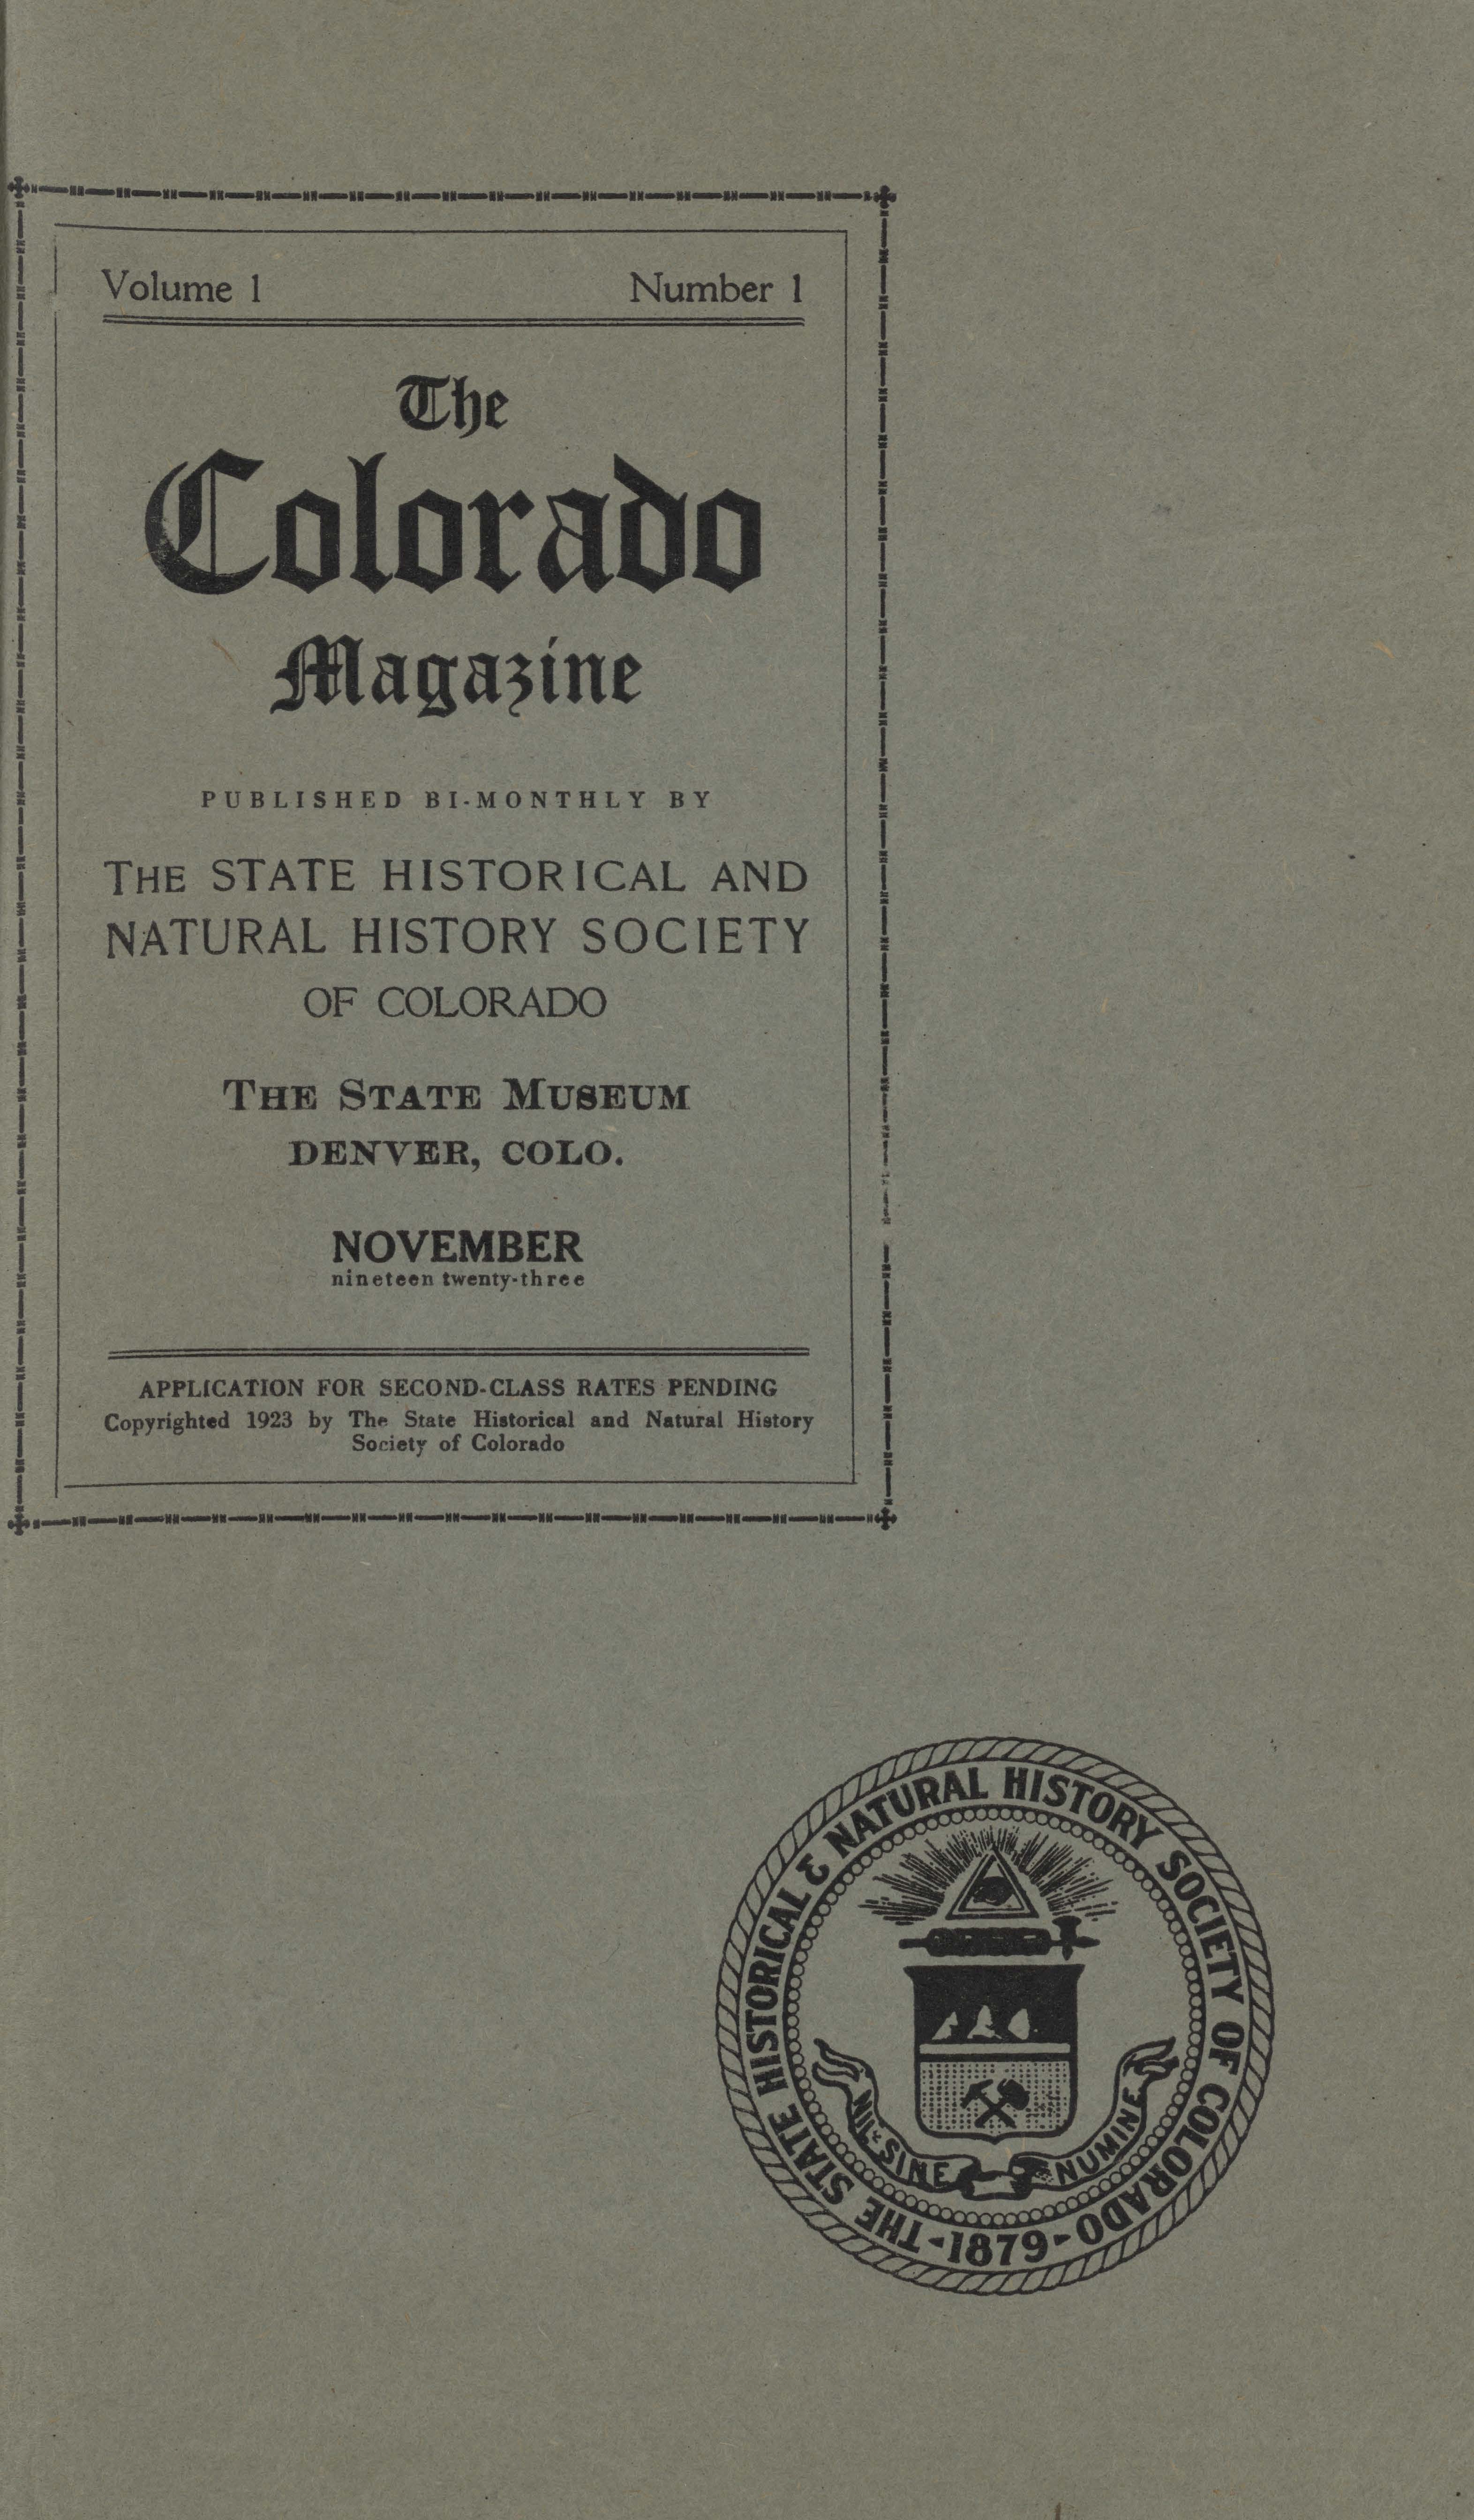 A digital scan of the first issue of The Colorado Magazine, published by the State Historical and Natural History Society of Colorado in November, 1923.